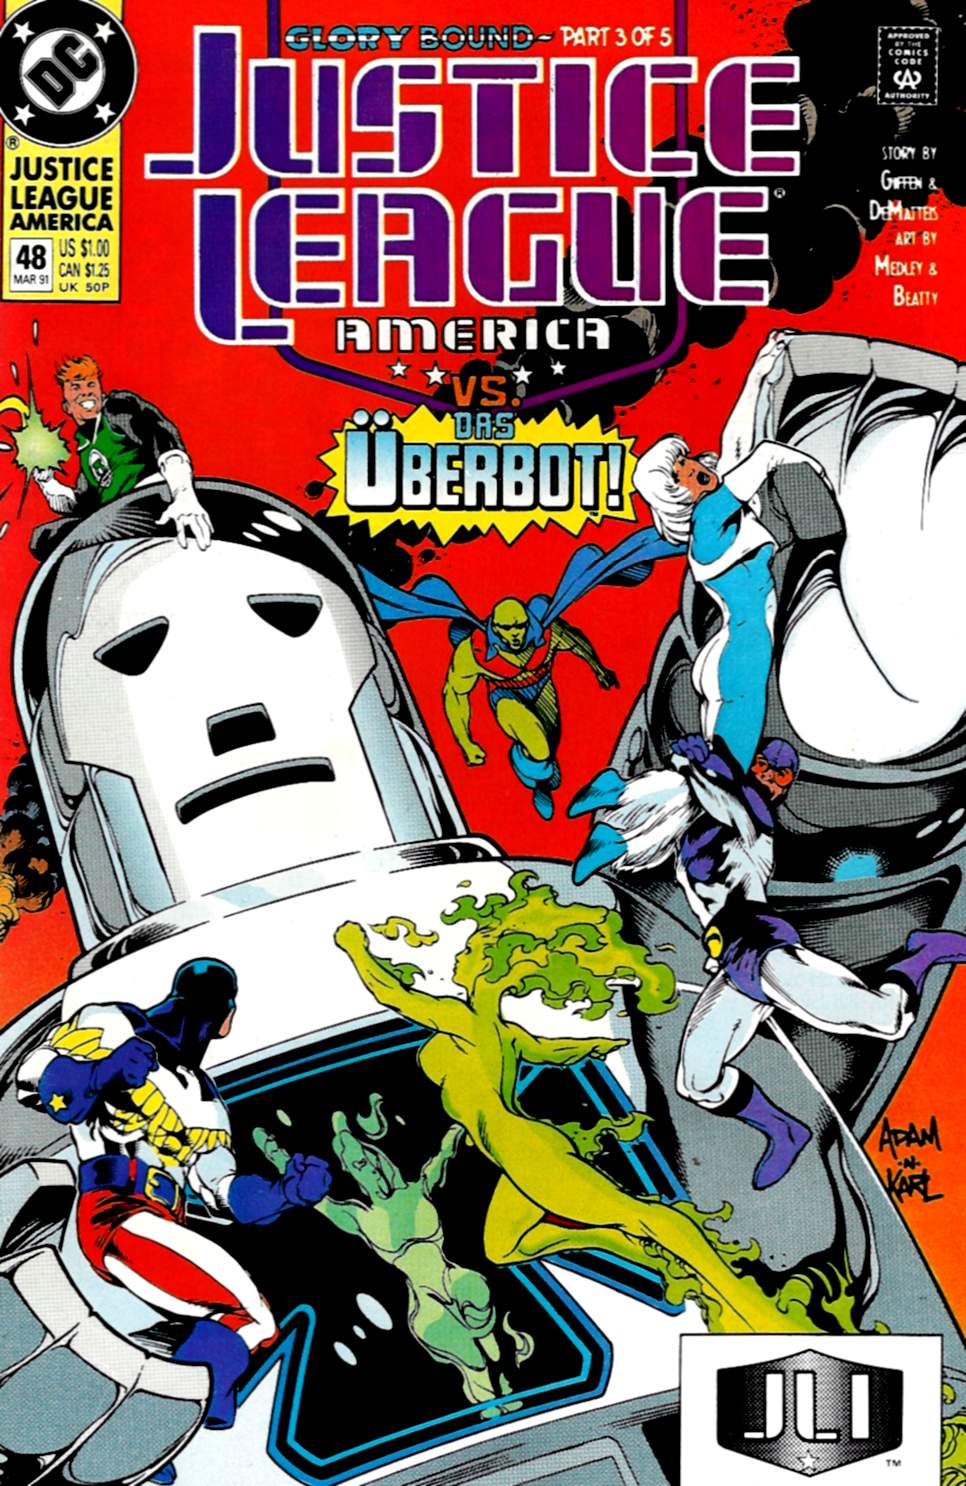 Read online Justice League America comic -  Issue #48 - 1